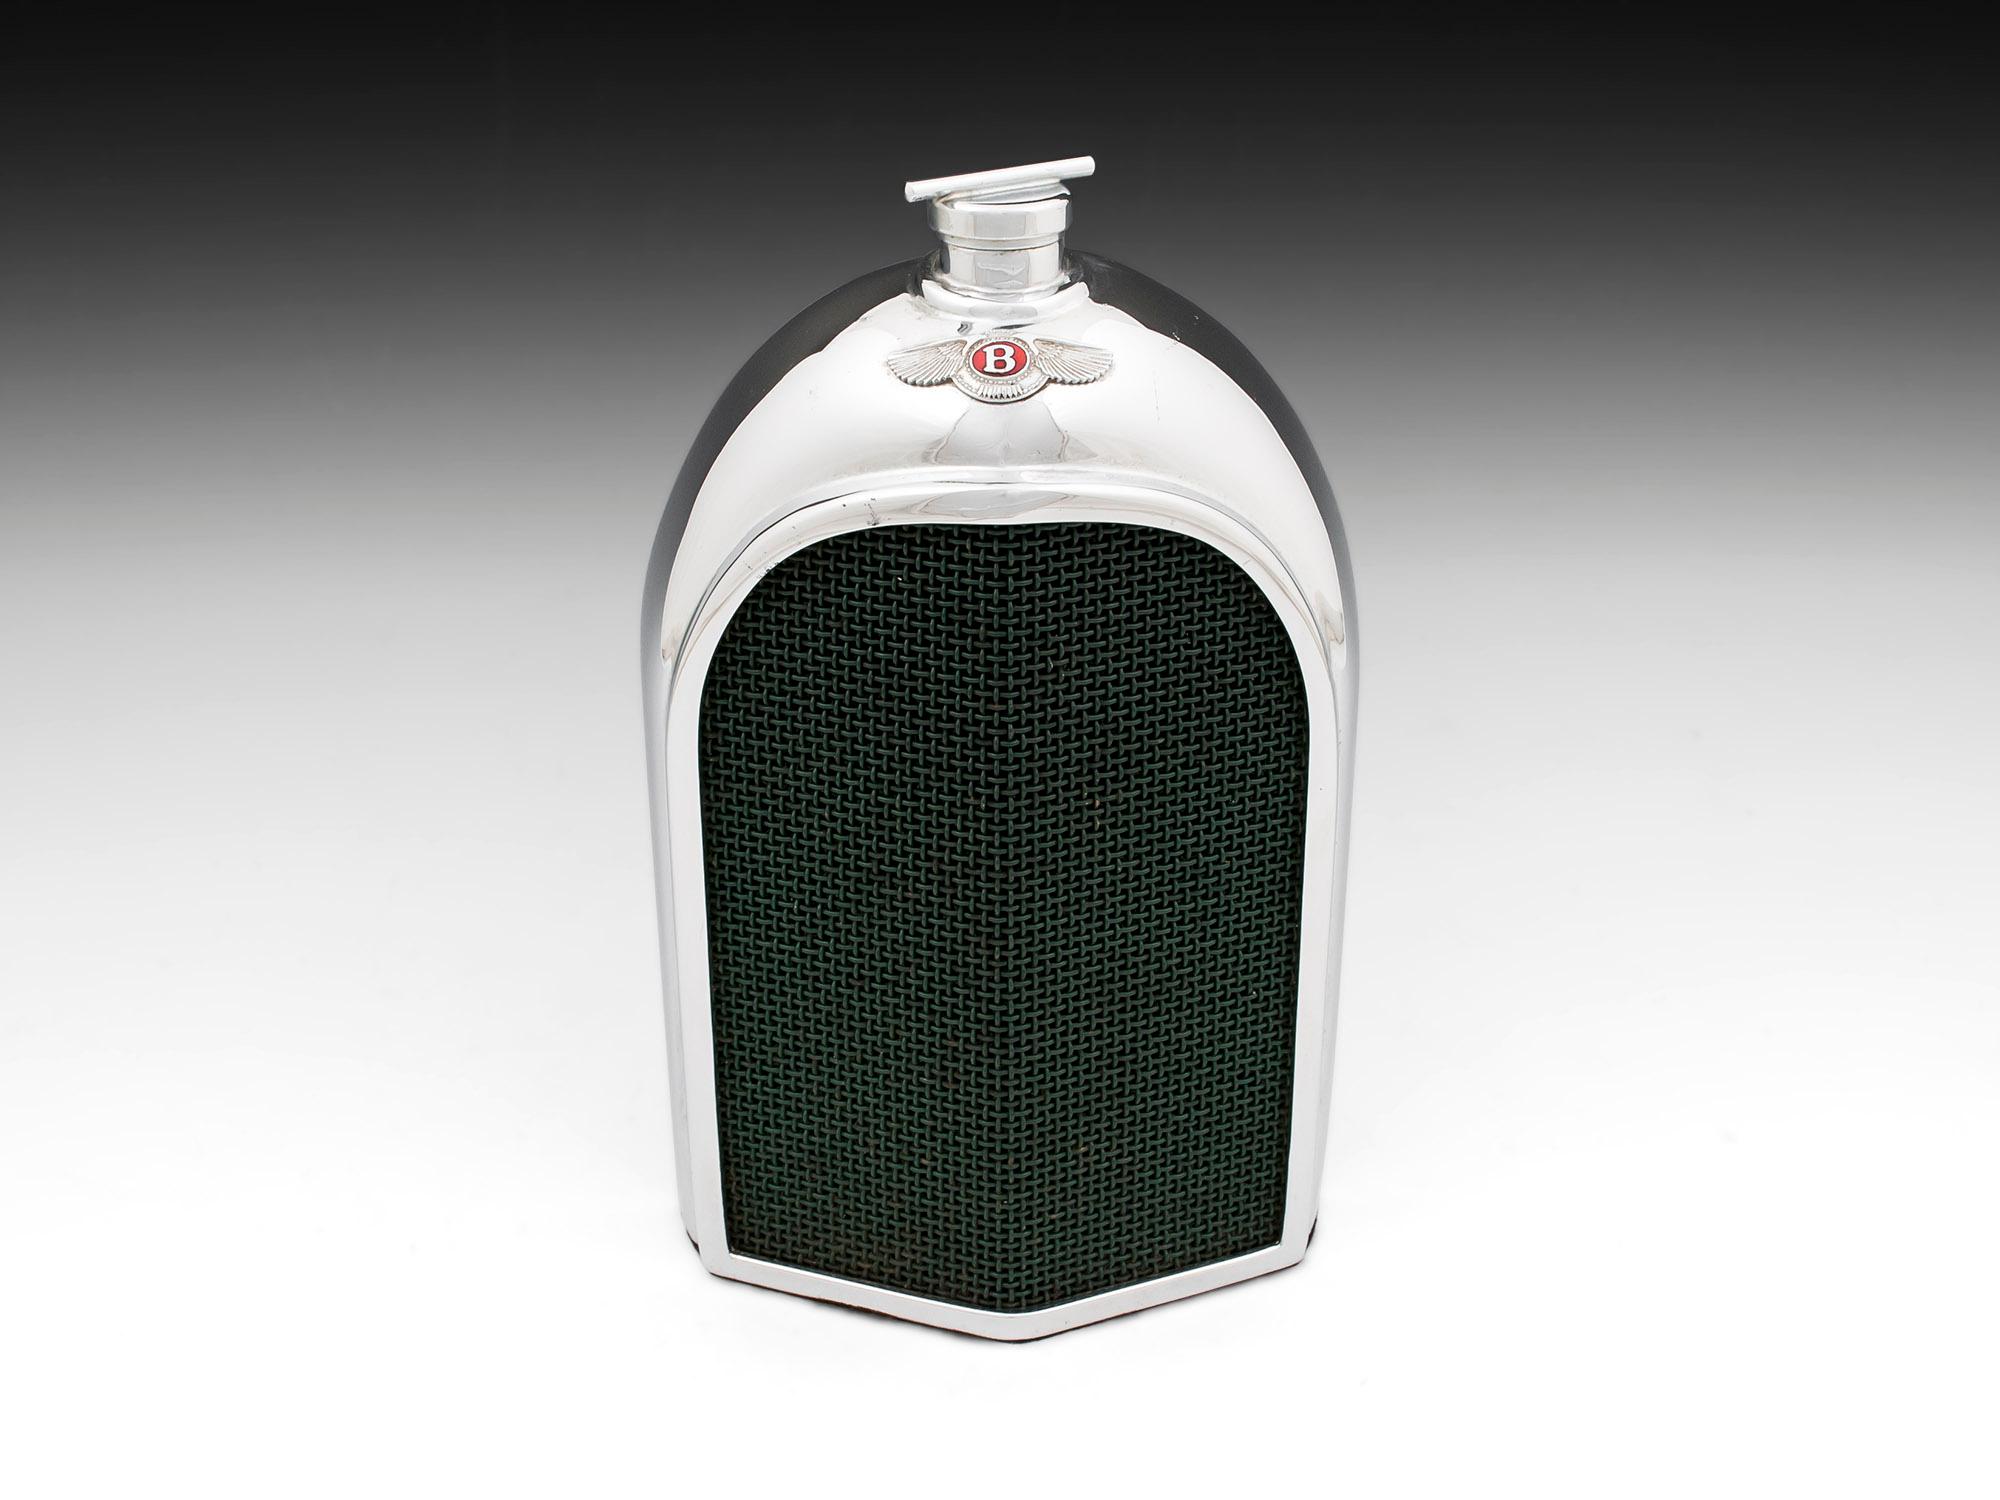 Stunning Bentley radiator spirit decanter. Heavy chromium-plated metal around a glass container with green mesh grill. 
There is a slot at the back to view its contents and a baize cloth on the base. 
The small red enamel Bentley badge and screw